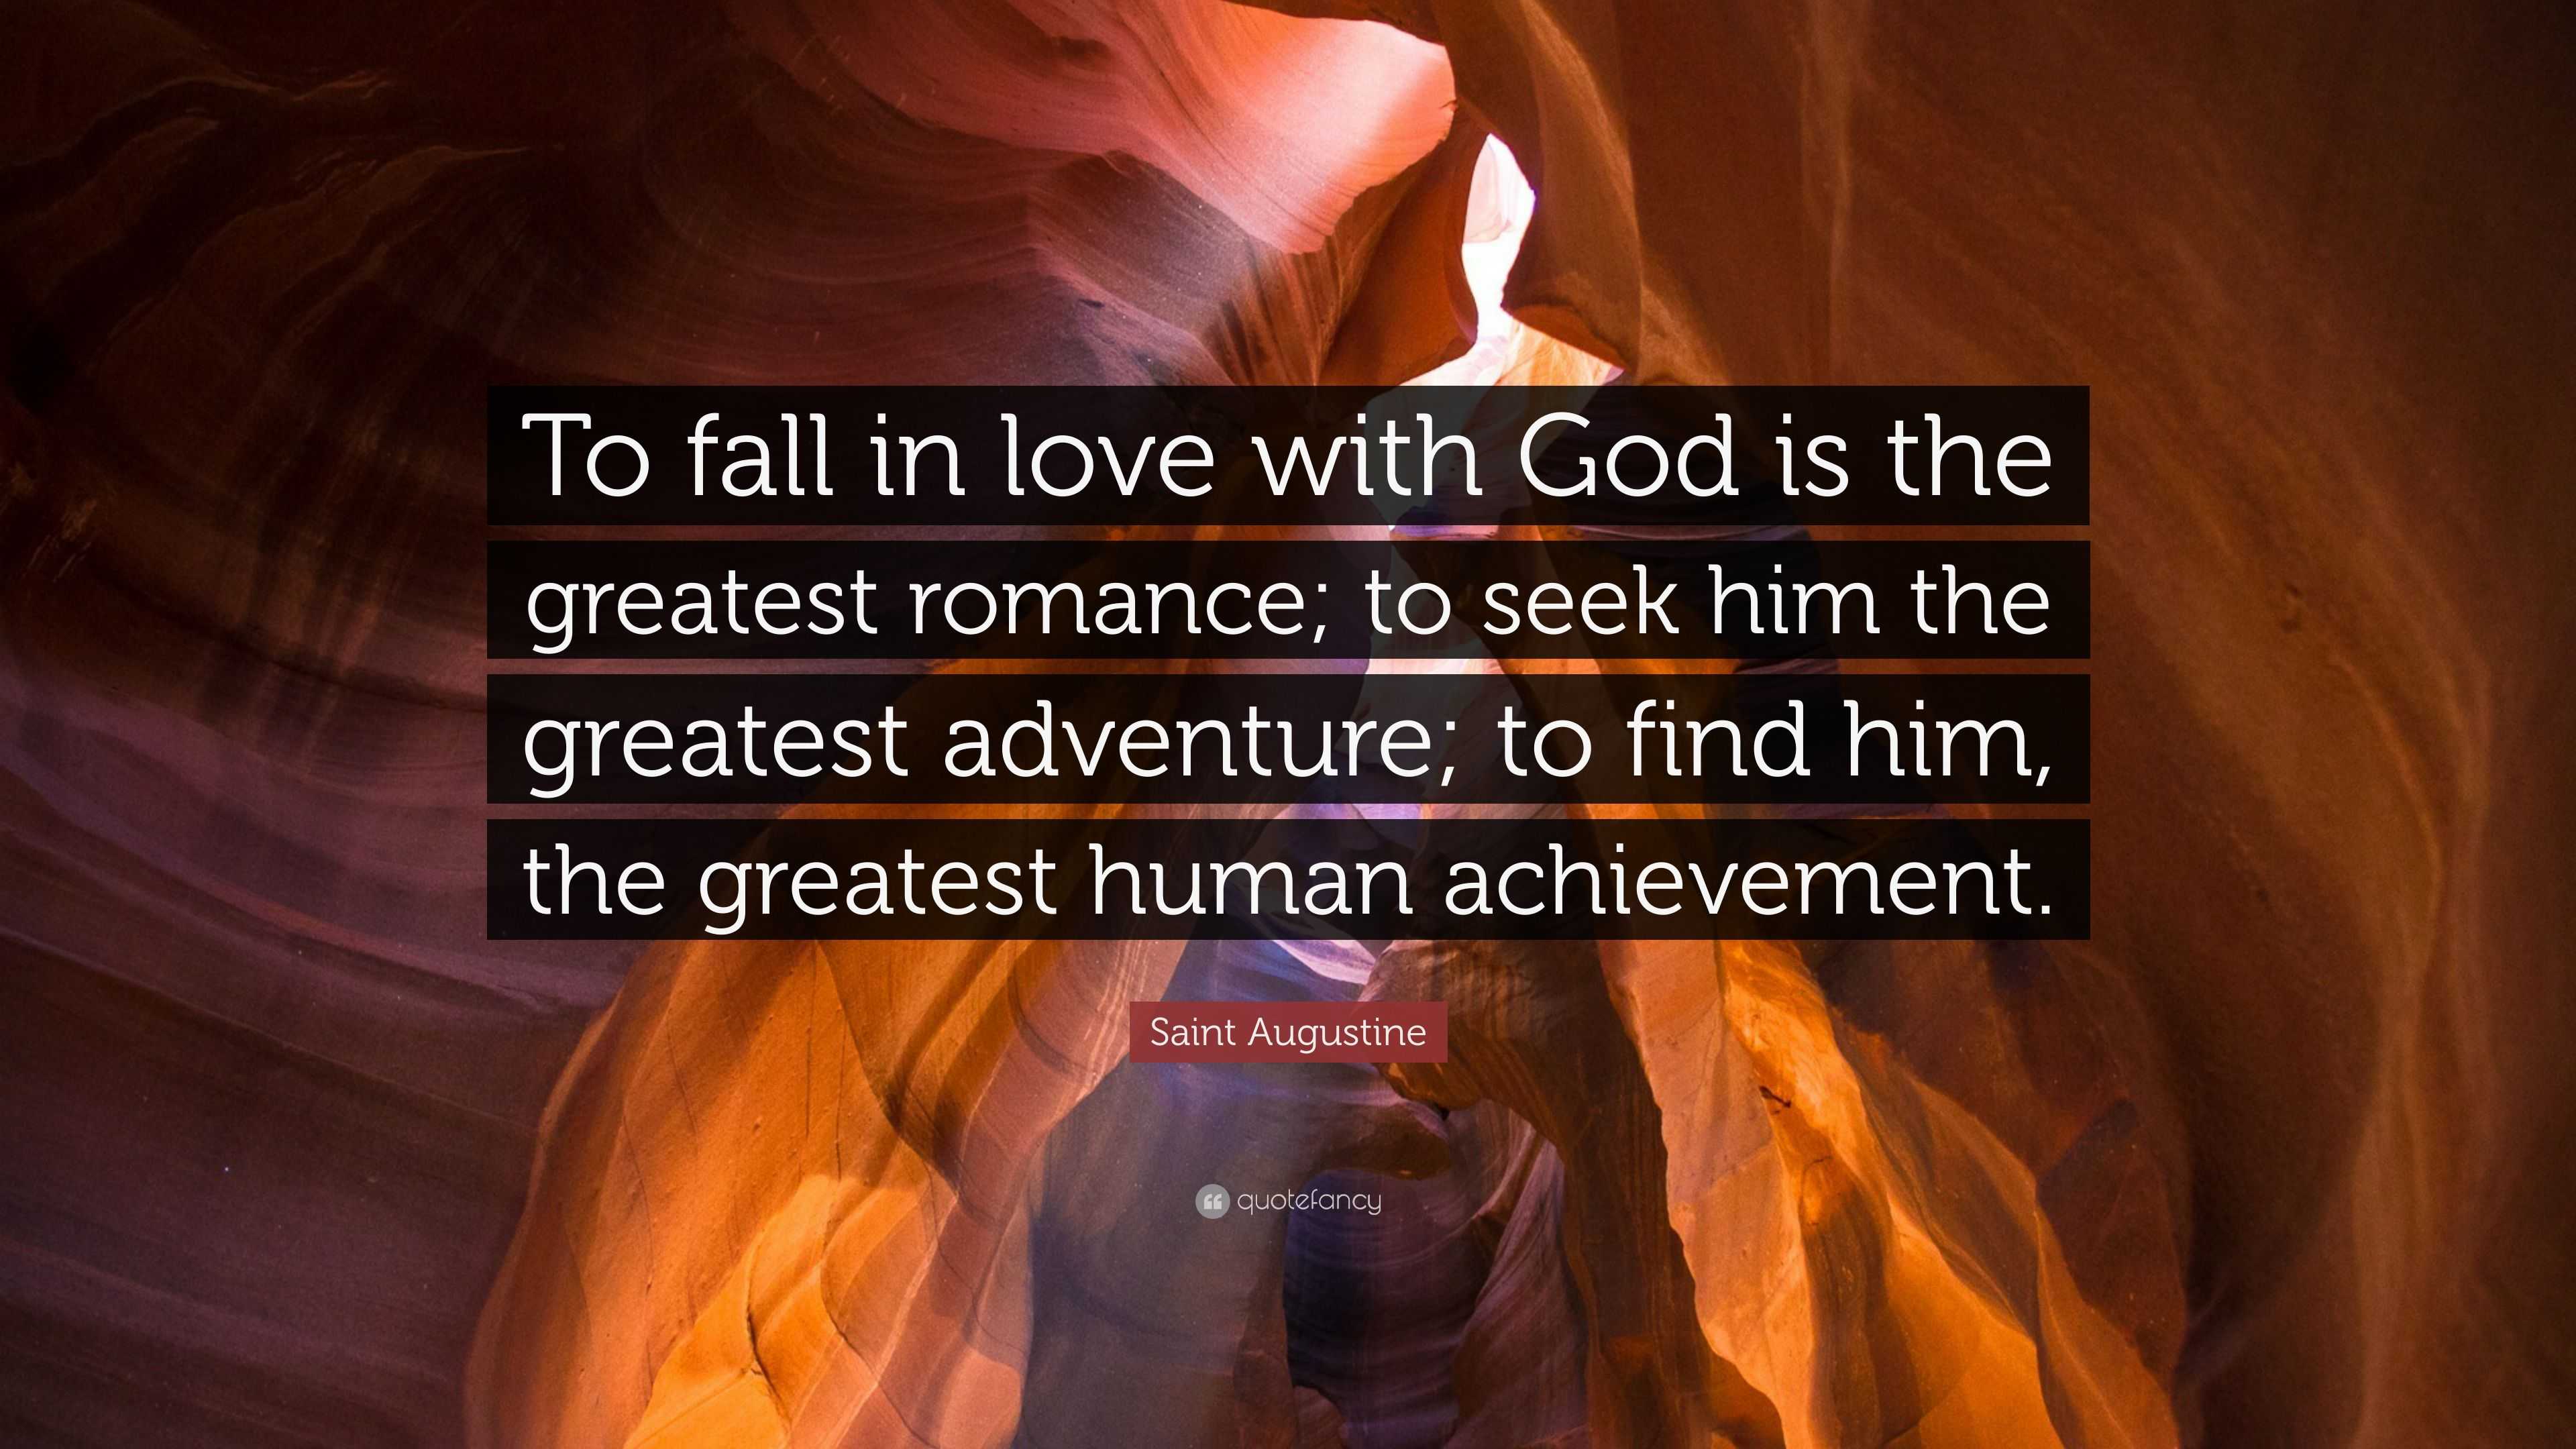 Saint Augustine Quote “To fall in love with God is the